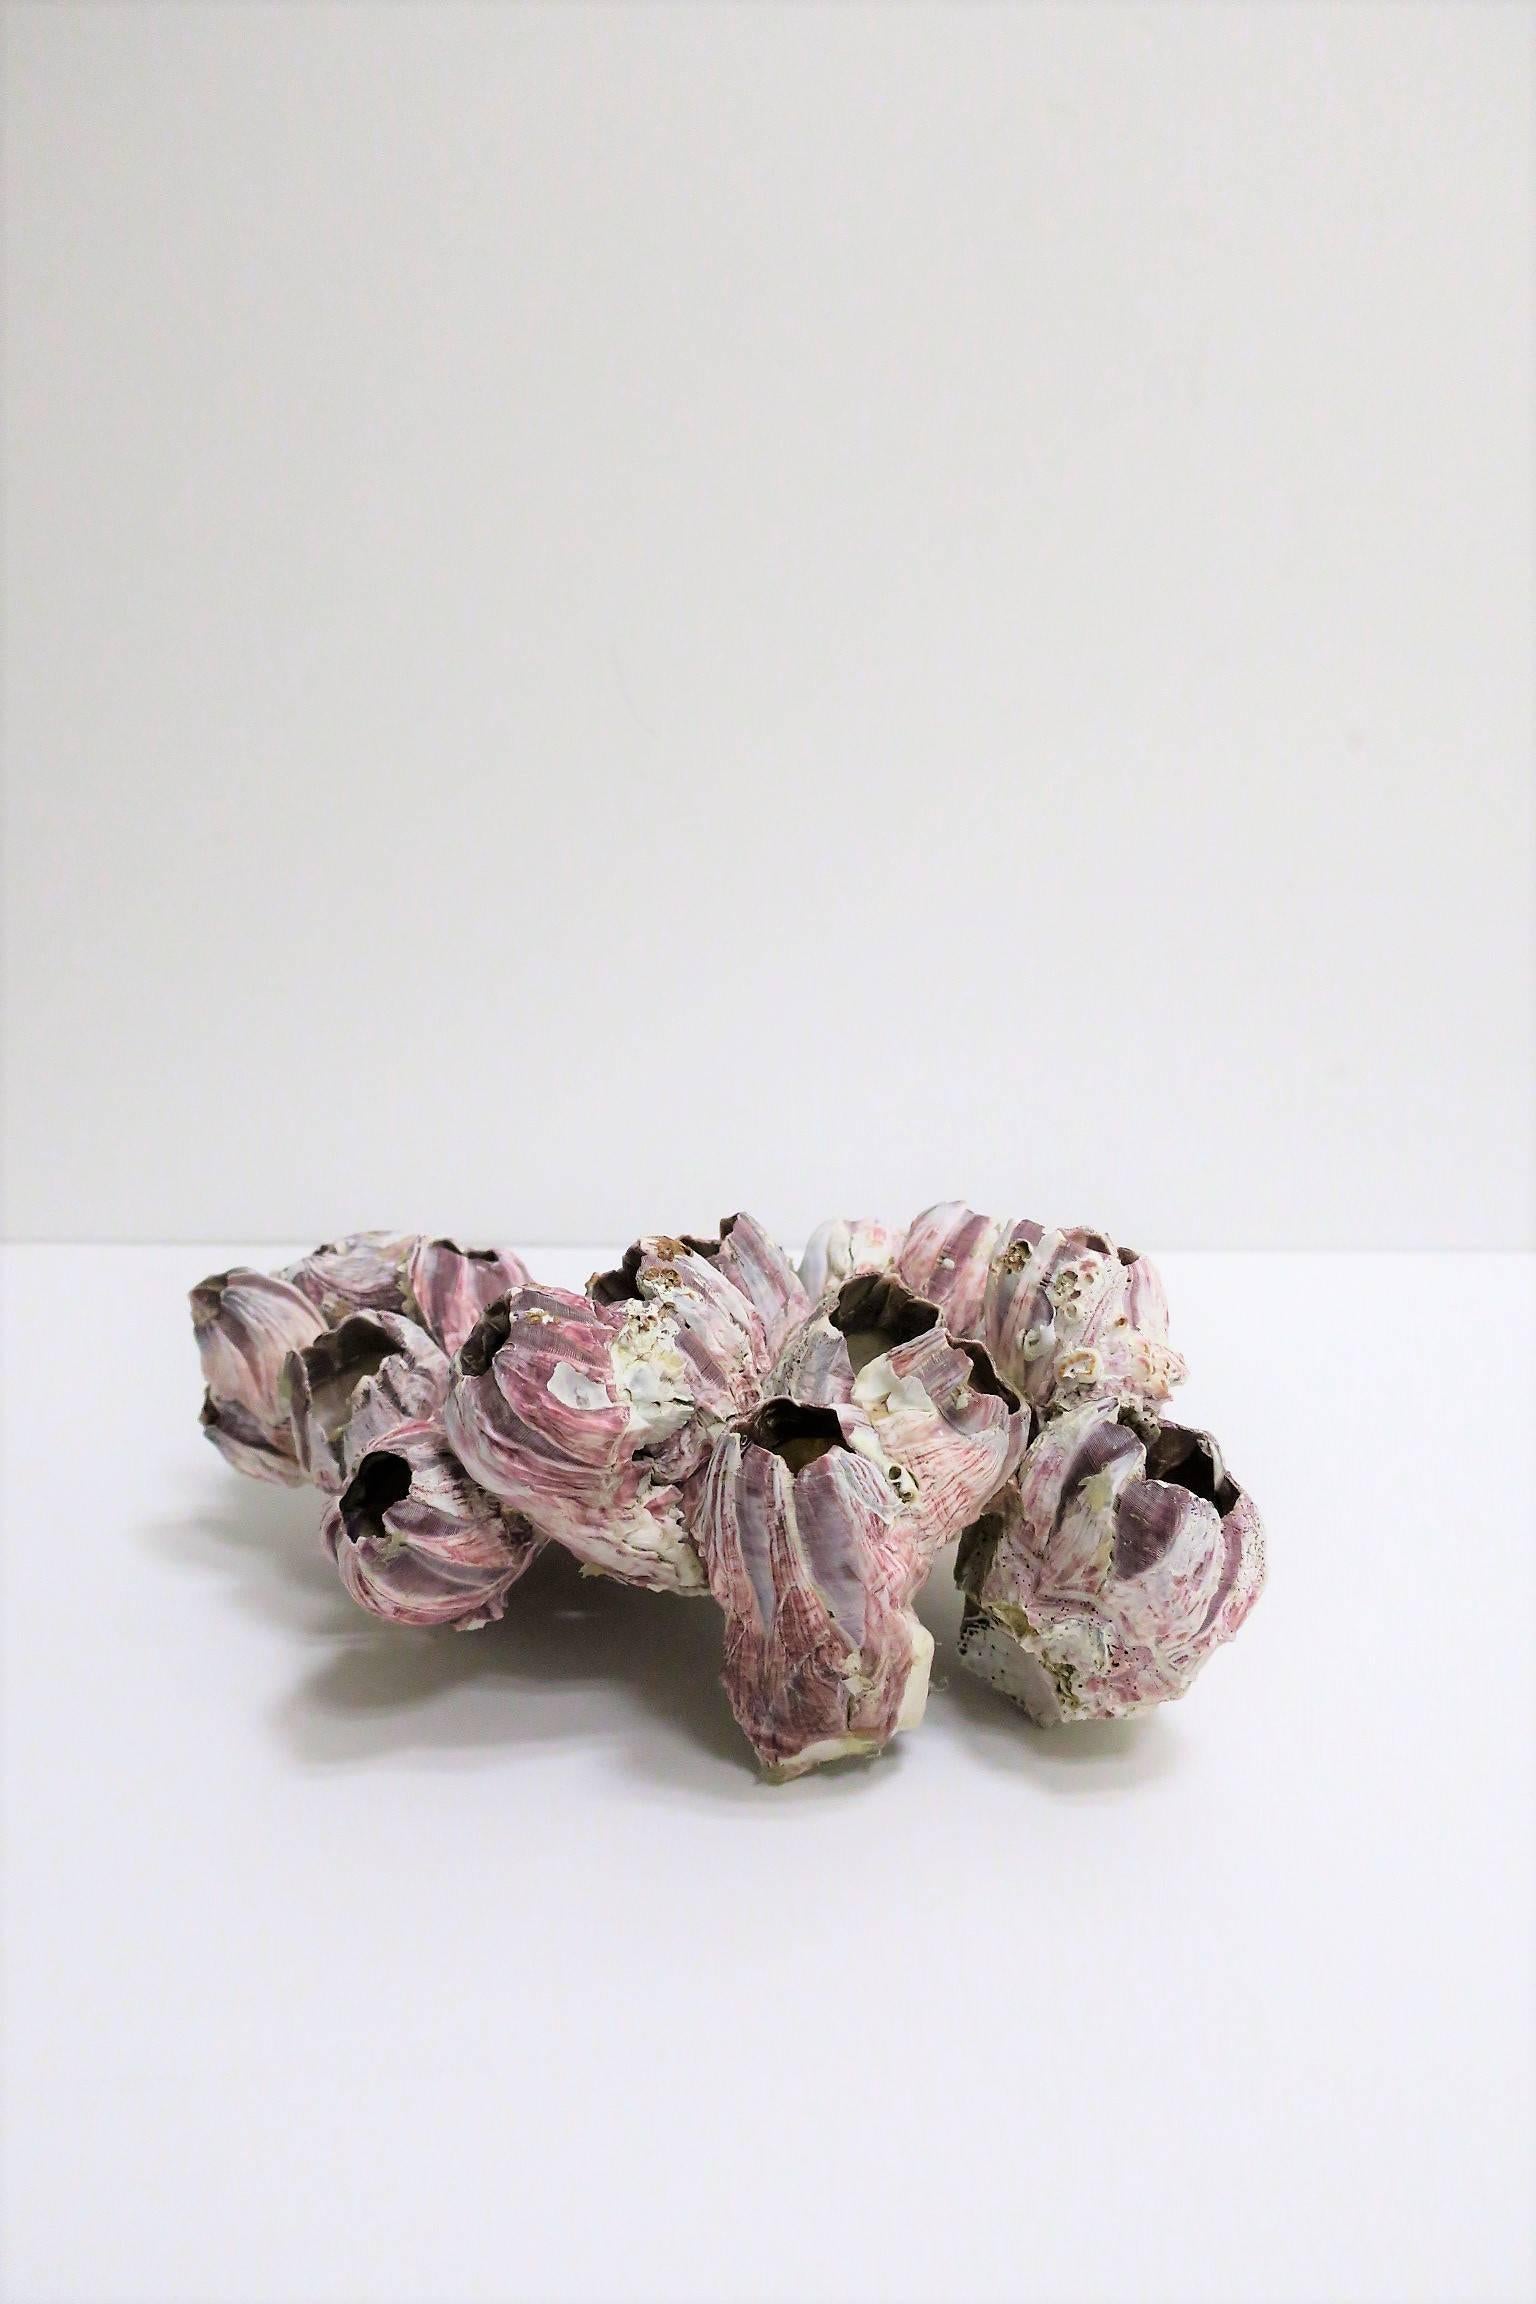 19th Century Vintage White and Purple Barnacle Coral Specimen Sculpture